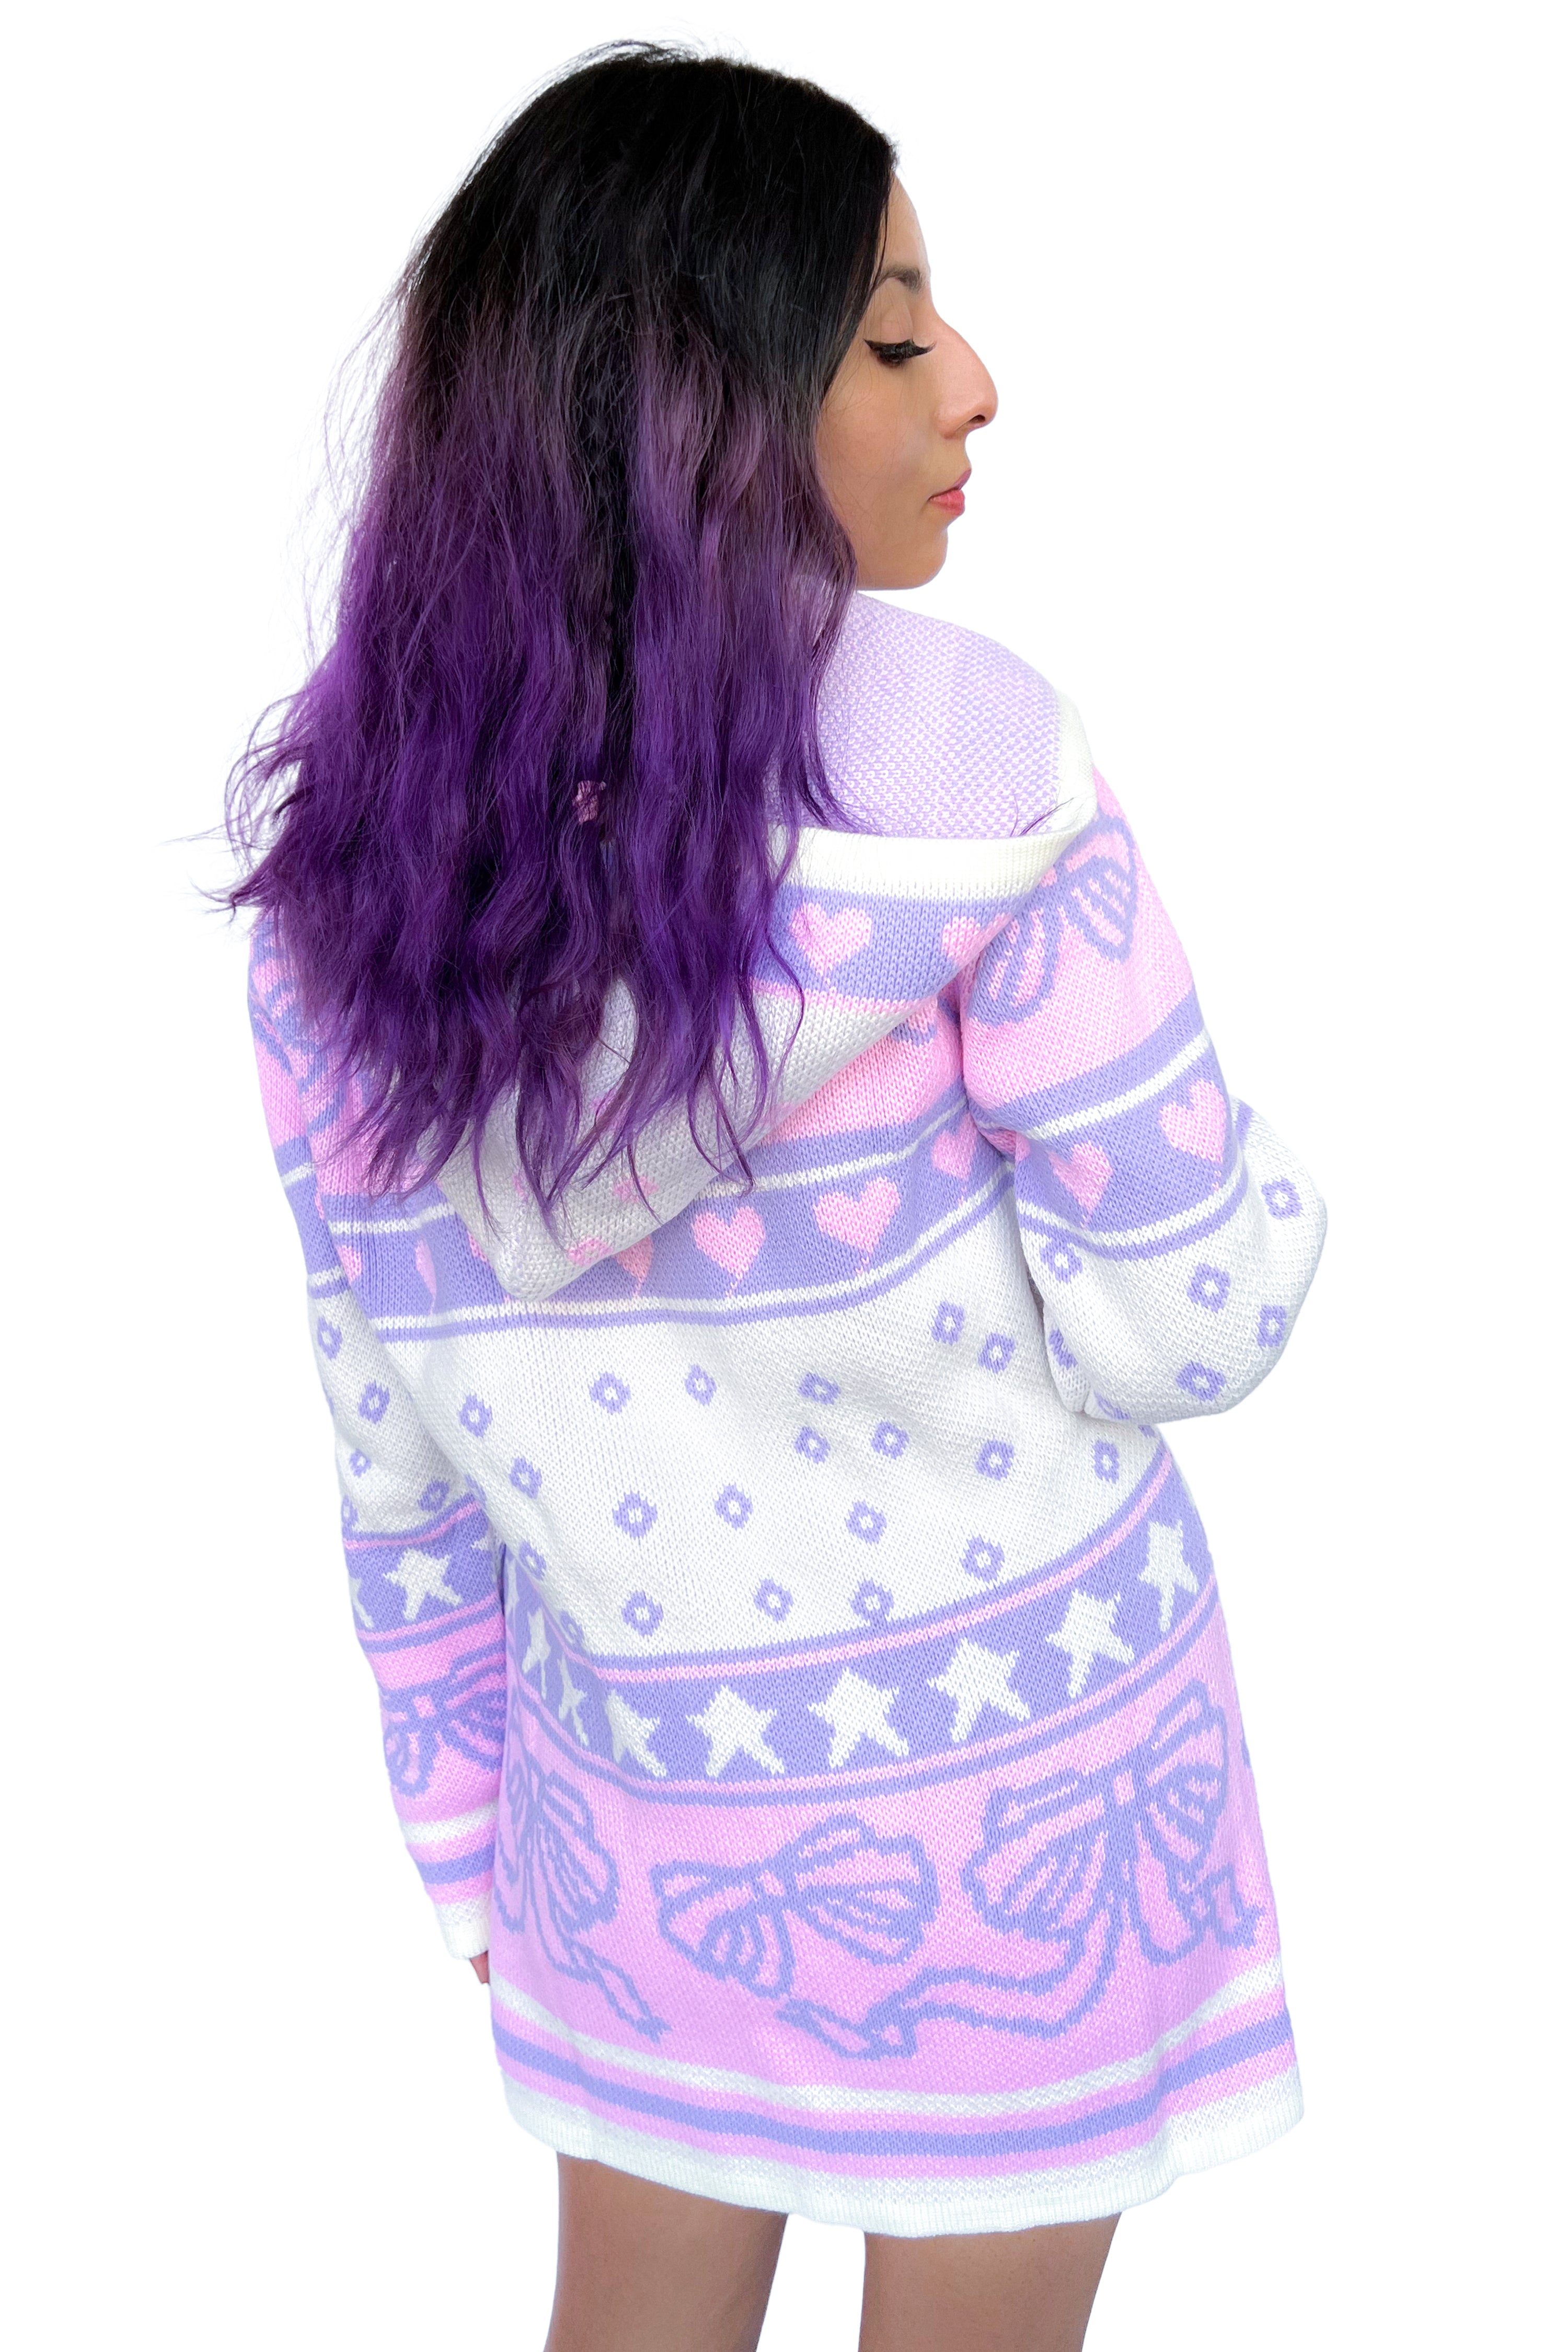 Thick zip up knit sweater with pink, lavender, and white knit, featuring bows, hearts, and stars